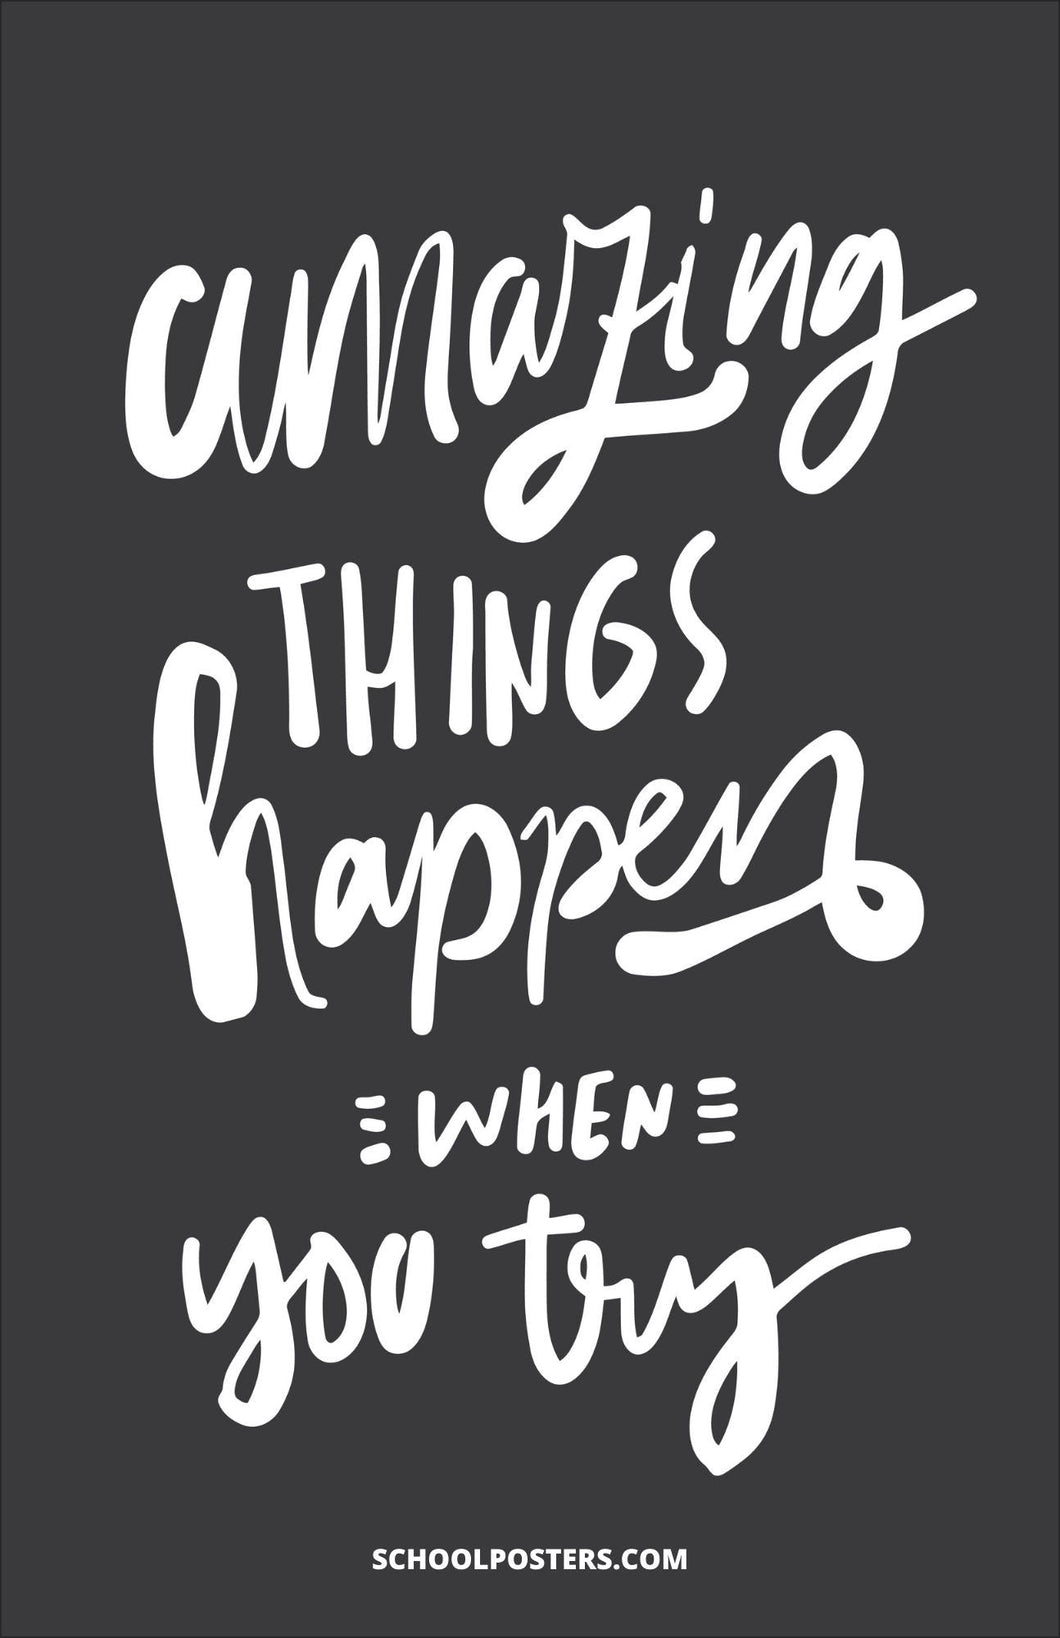 Amazing Things Happen Poster